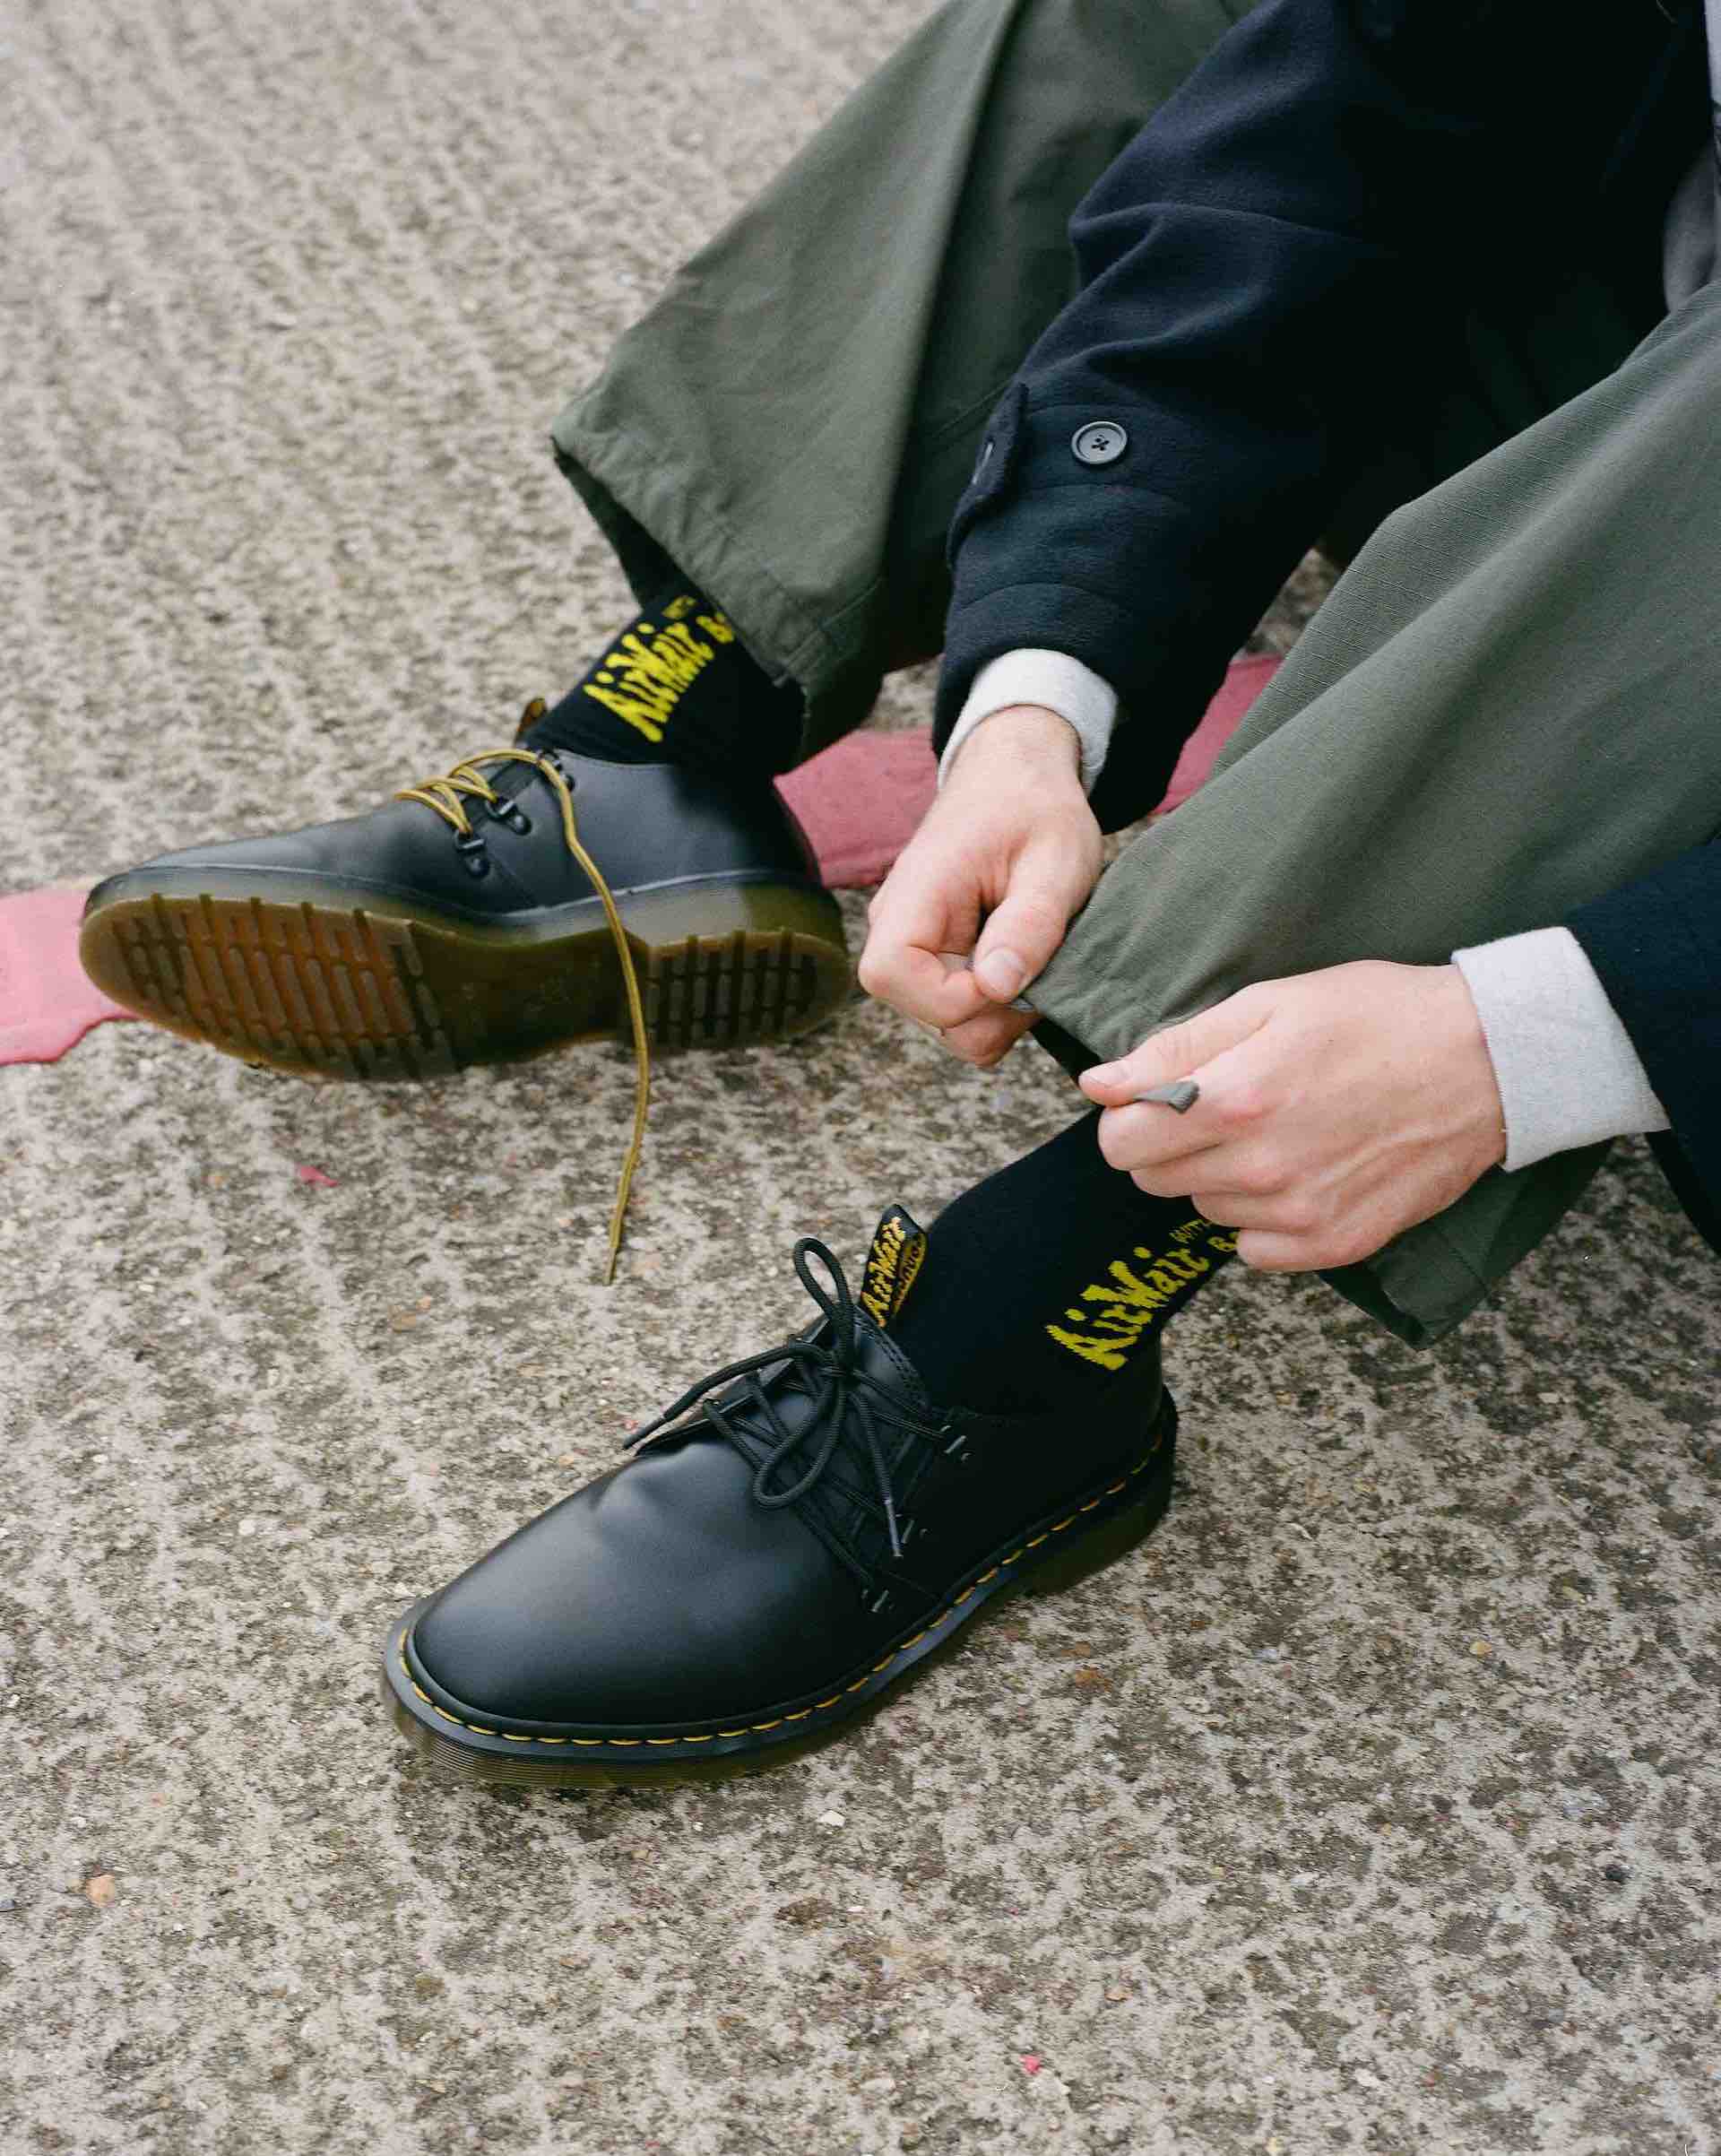 ＜DR. MARTENS × ENGINEERED GARMENTS＞MADE IN ENGLANDの「1461」3ホールシューズ2型が登場 fashion220901-drmartens-03